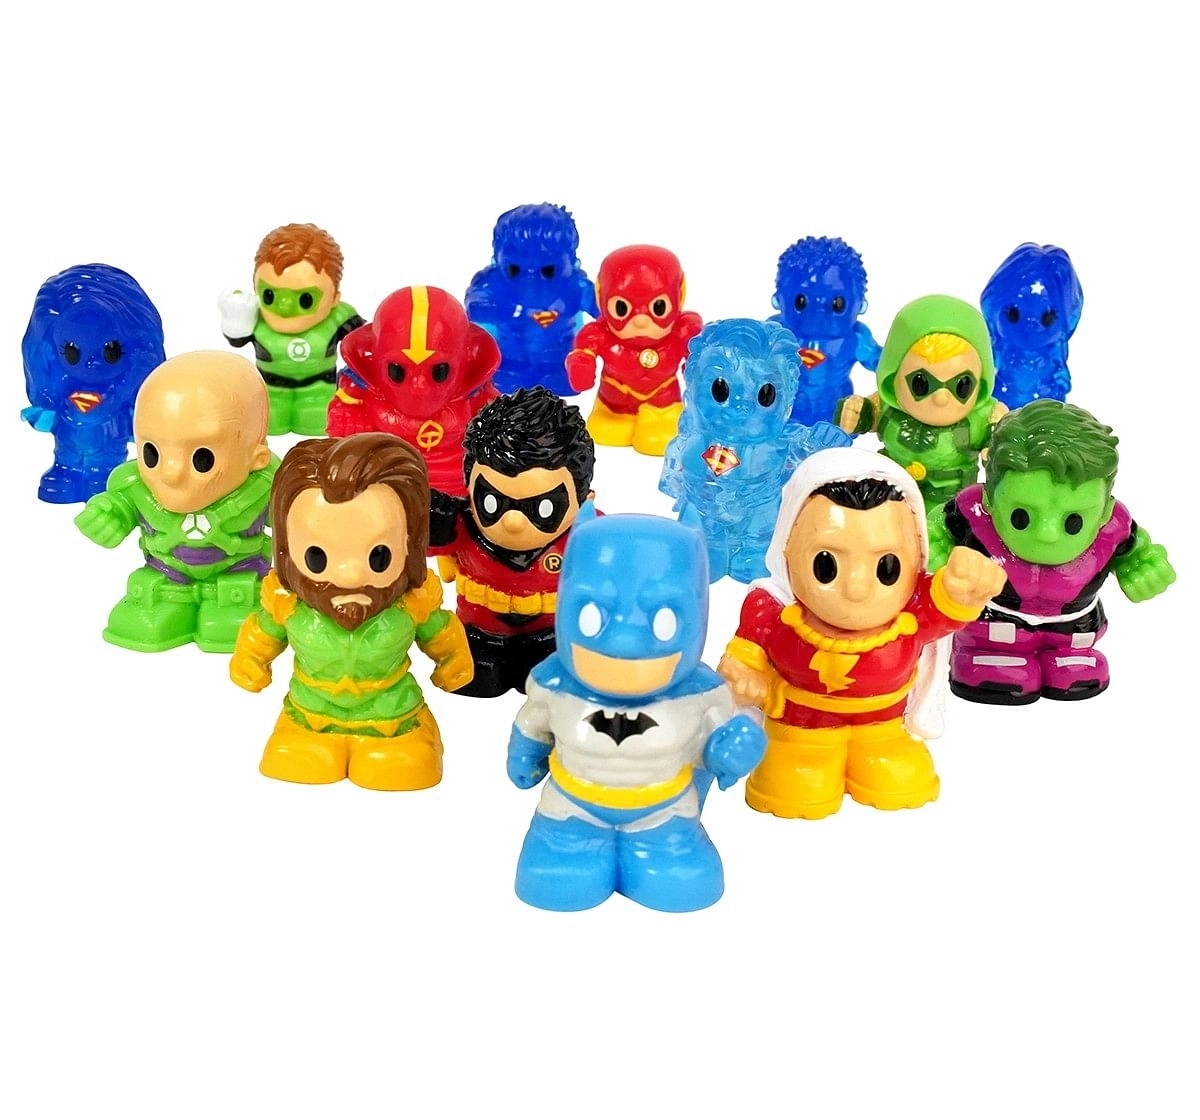 Ooshies Xl 6Pcs Superboy, New Outfit Batman, Bronze The Flash, Cyborg, Two Face, One Surprise Ooshie,  5Y+ (Multicolor)